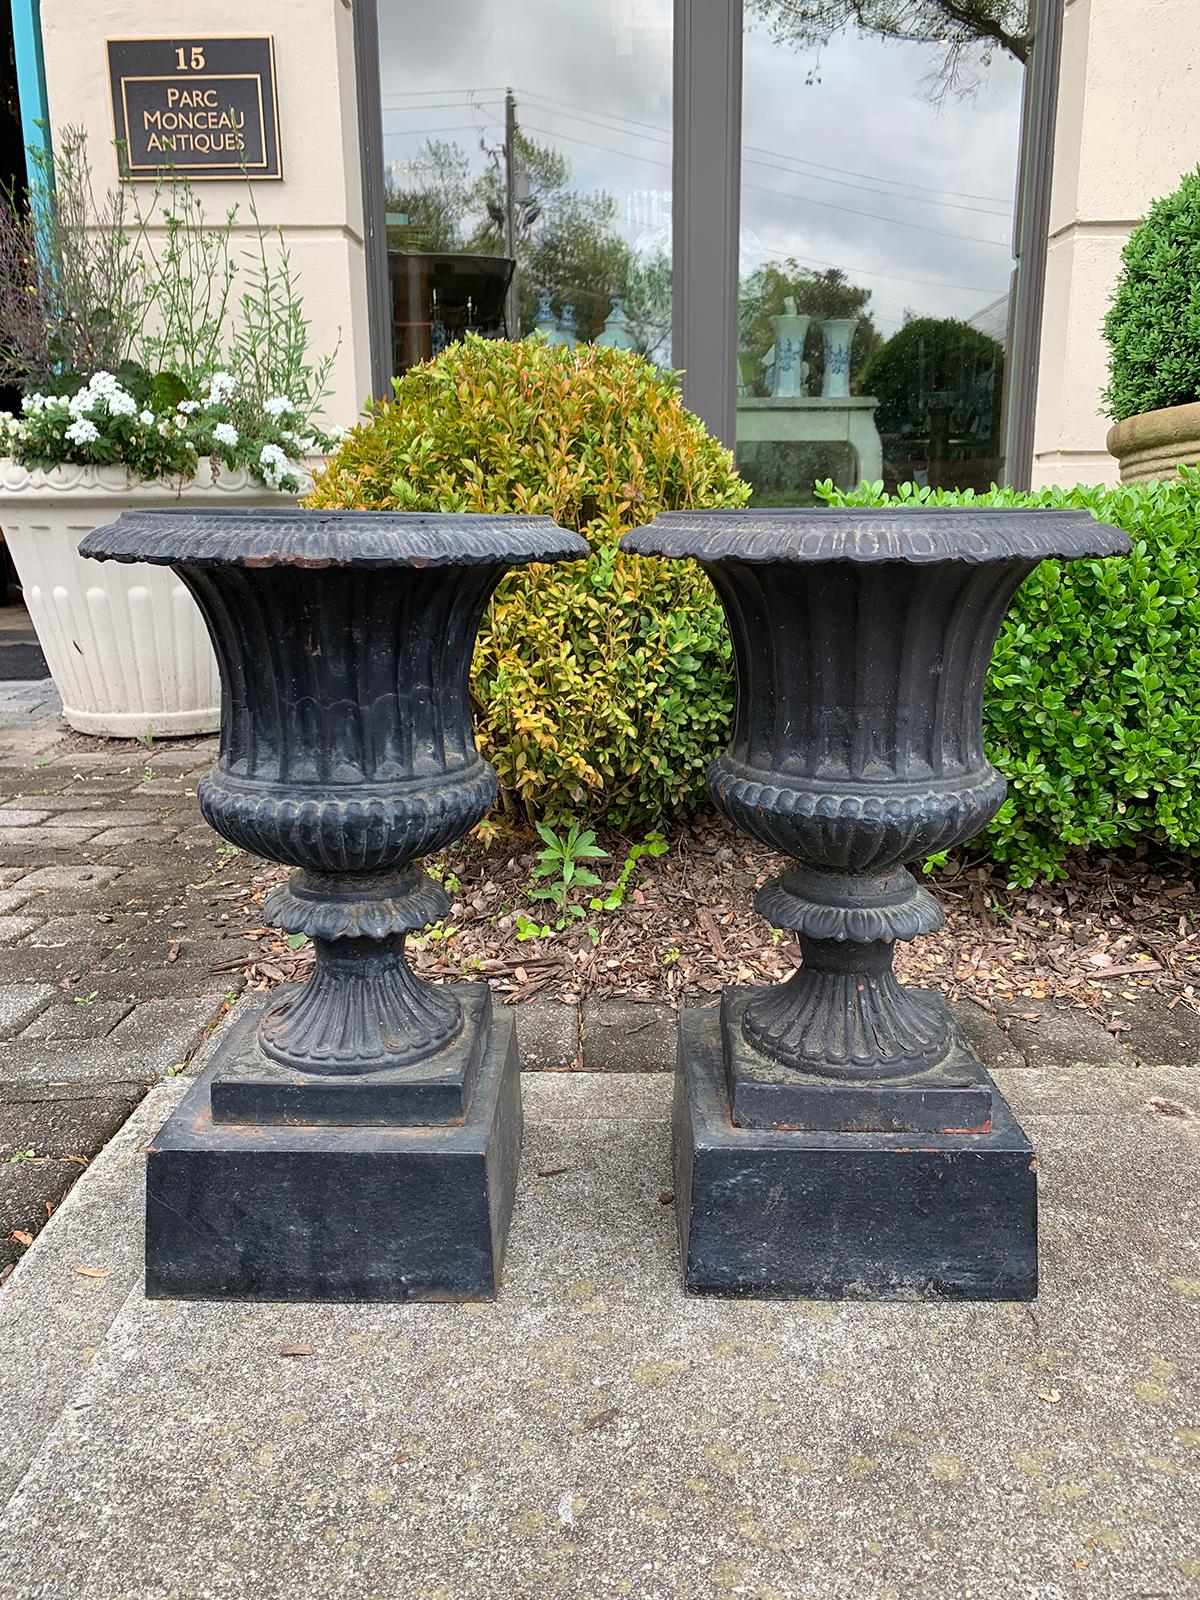 Pair of neoclassical iron urns with stands, circa 1900
garden planters.